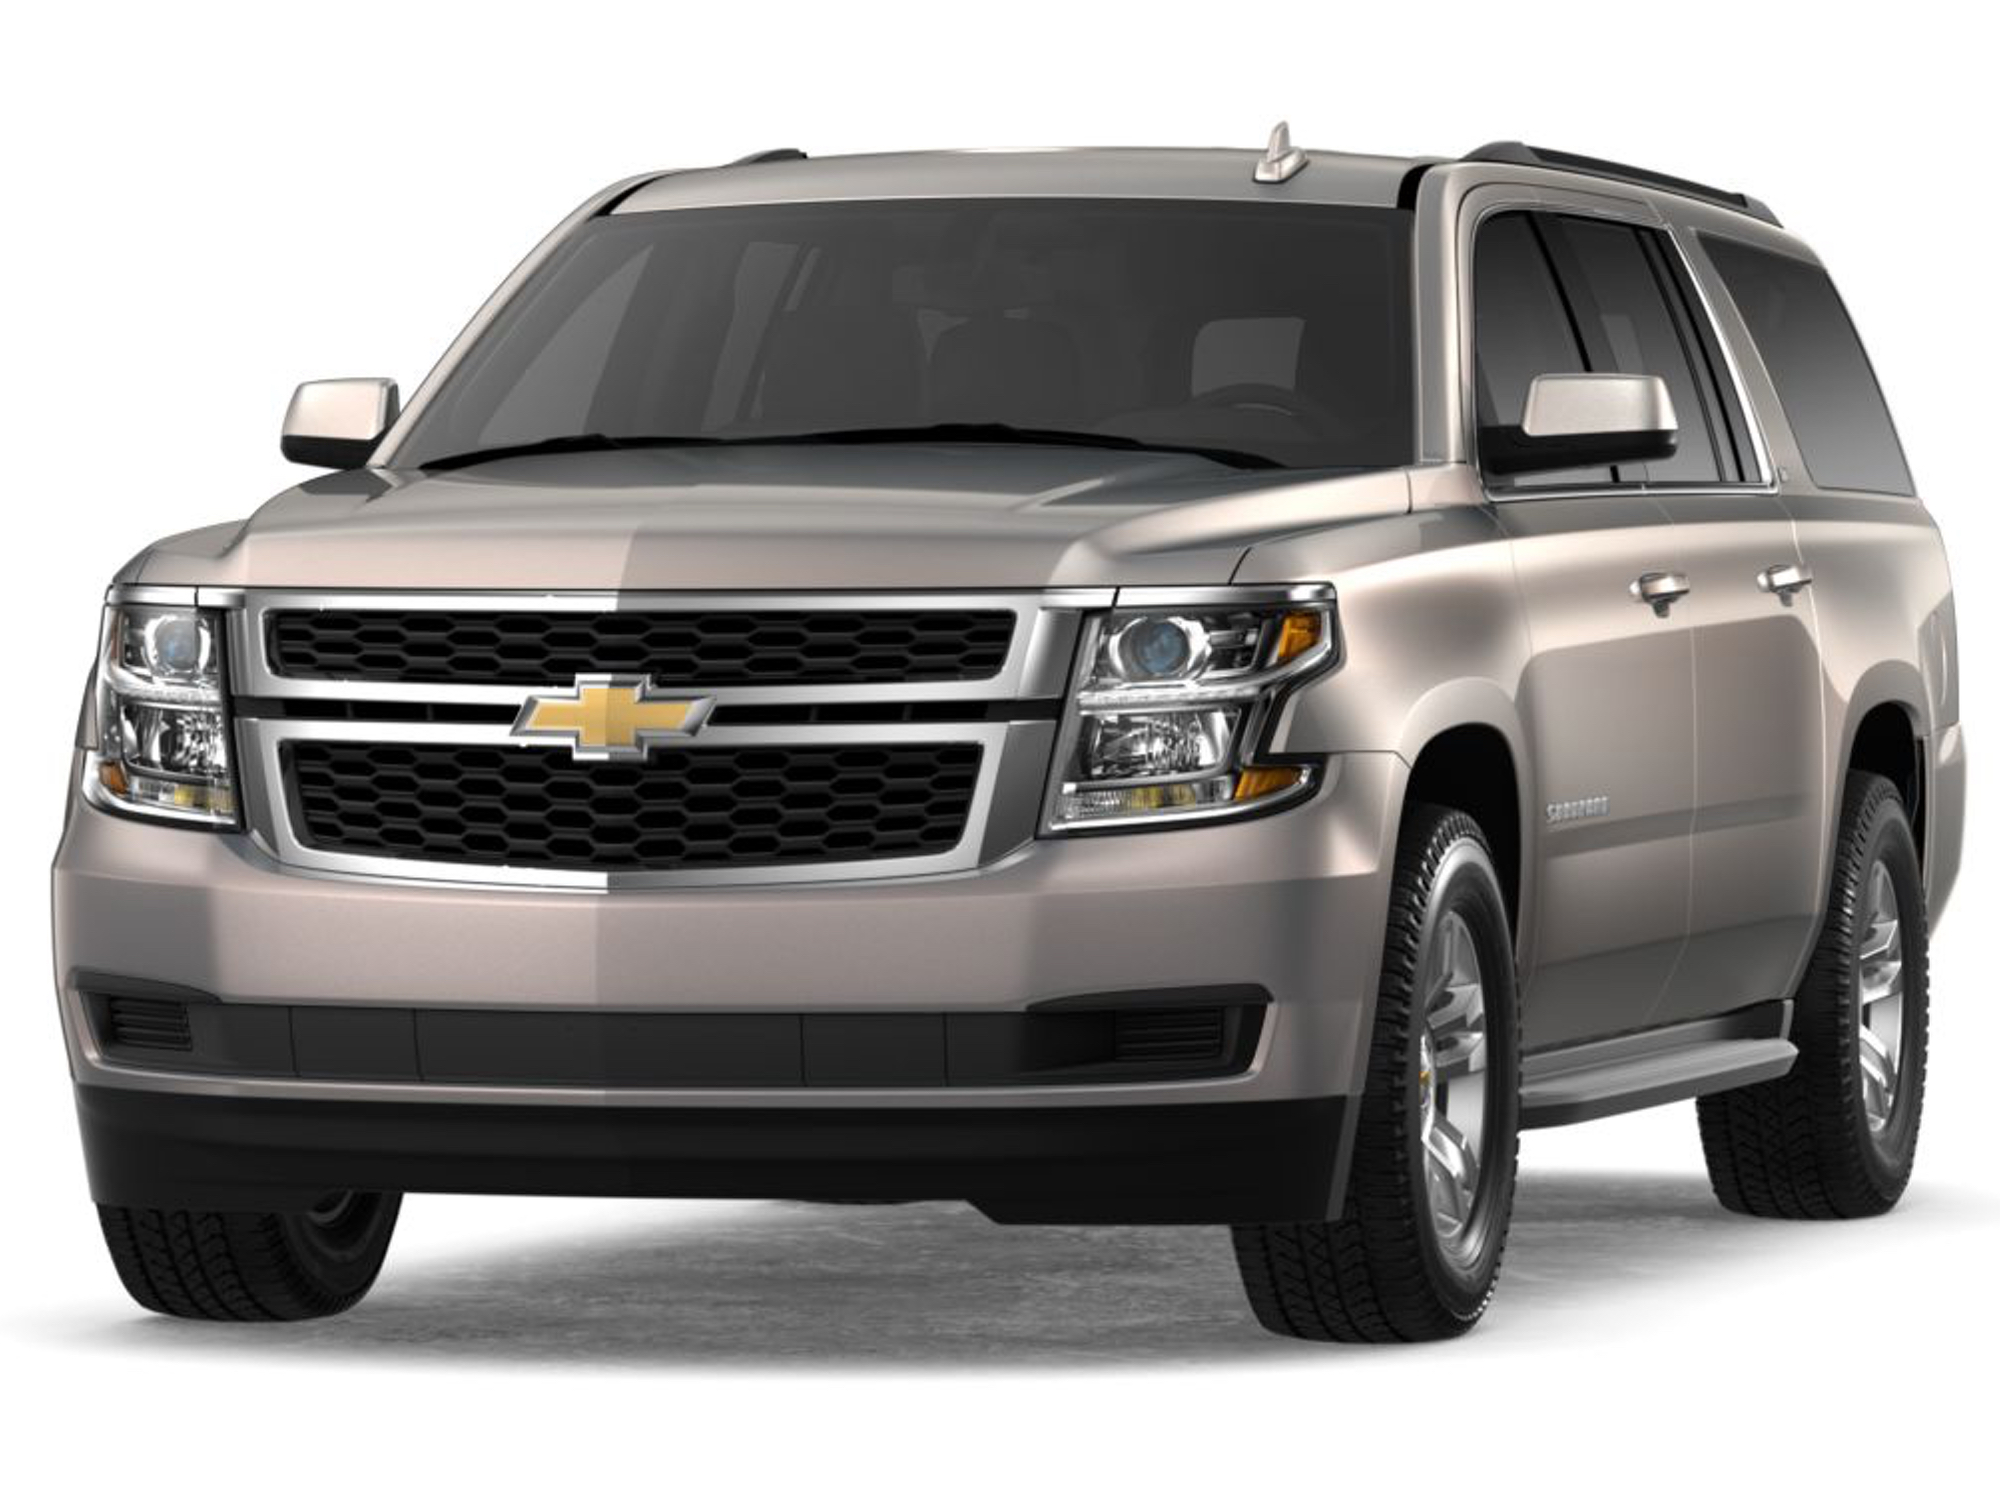 2020 Chevrolet Suburban: Here's What's New And Different | GM